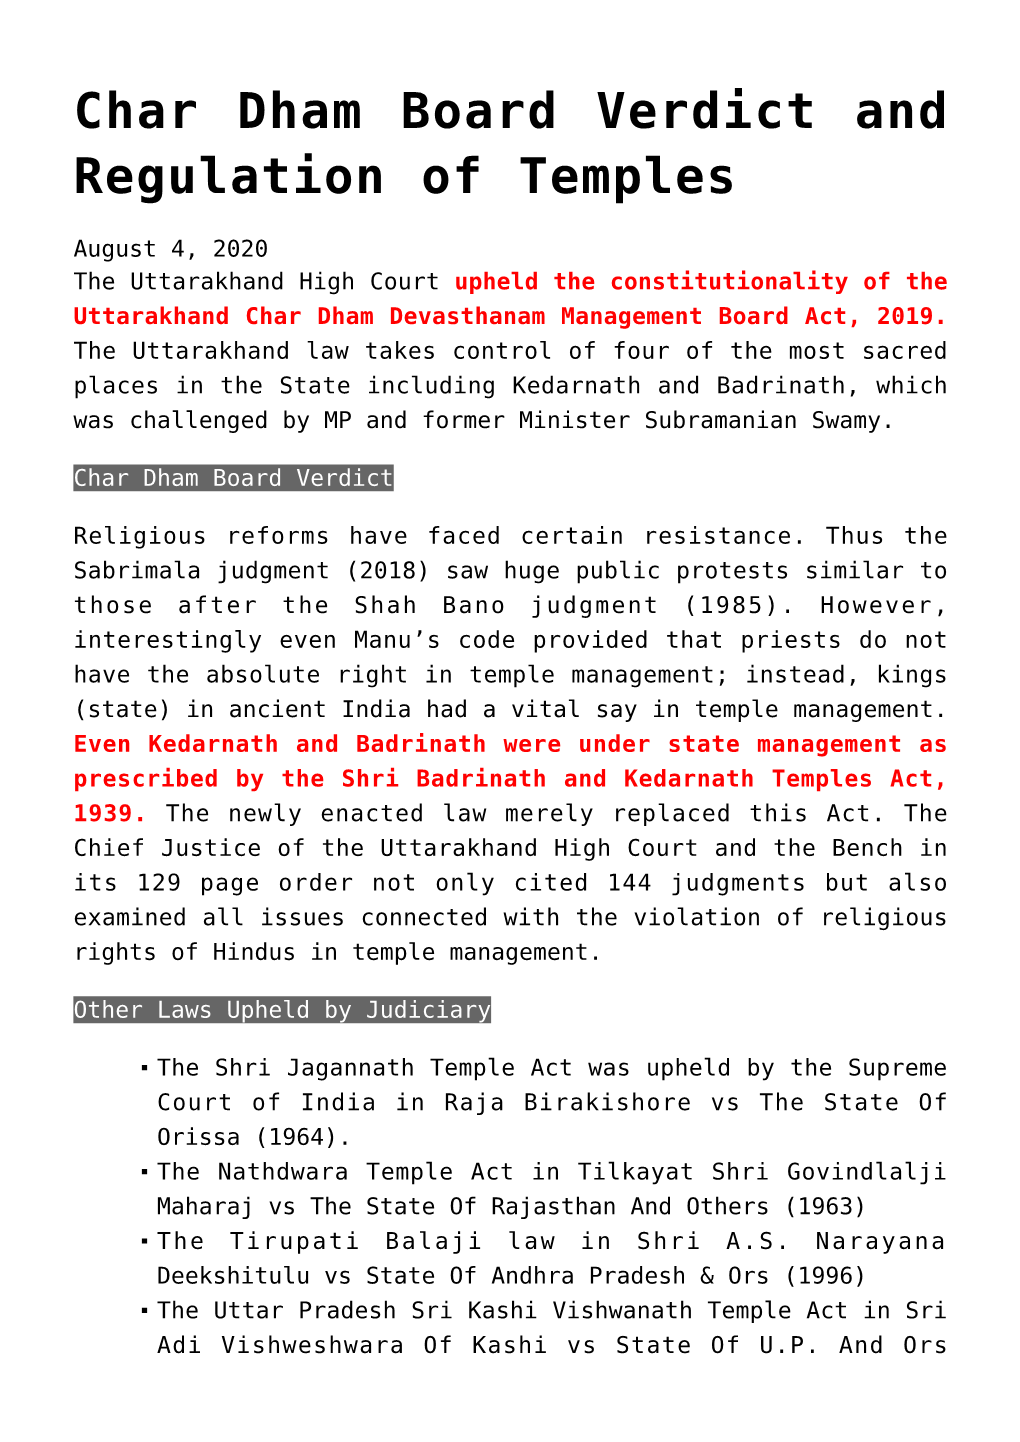 Char Dham Board Verdict and Regulation of Temples